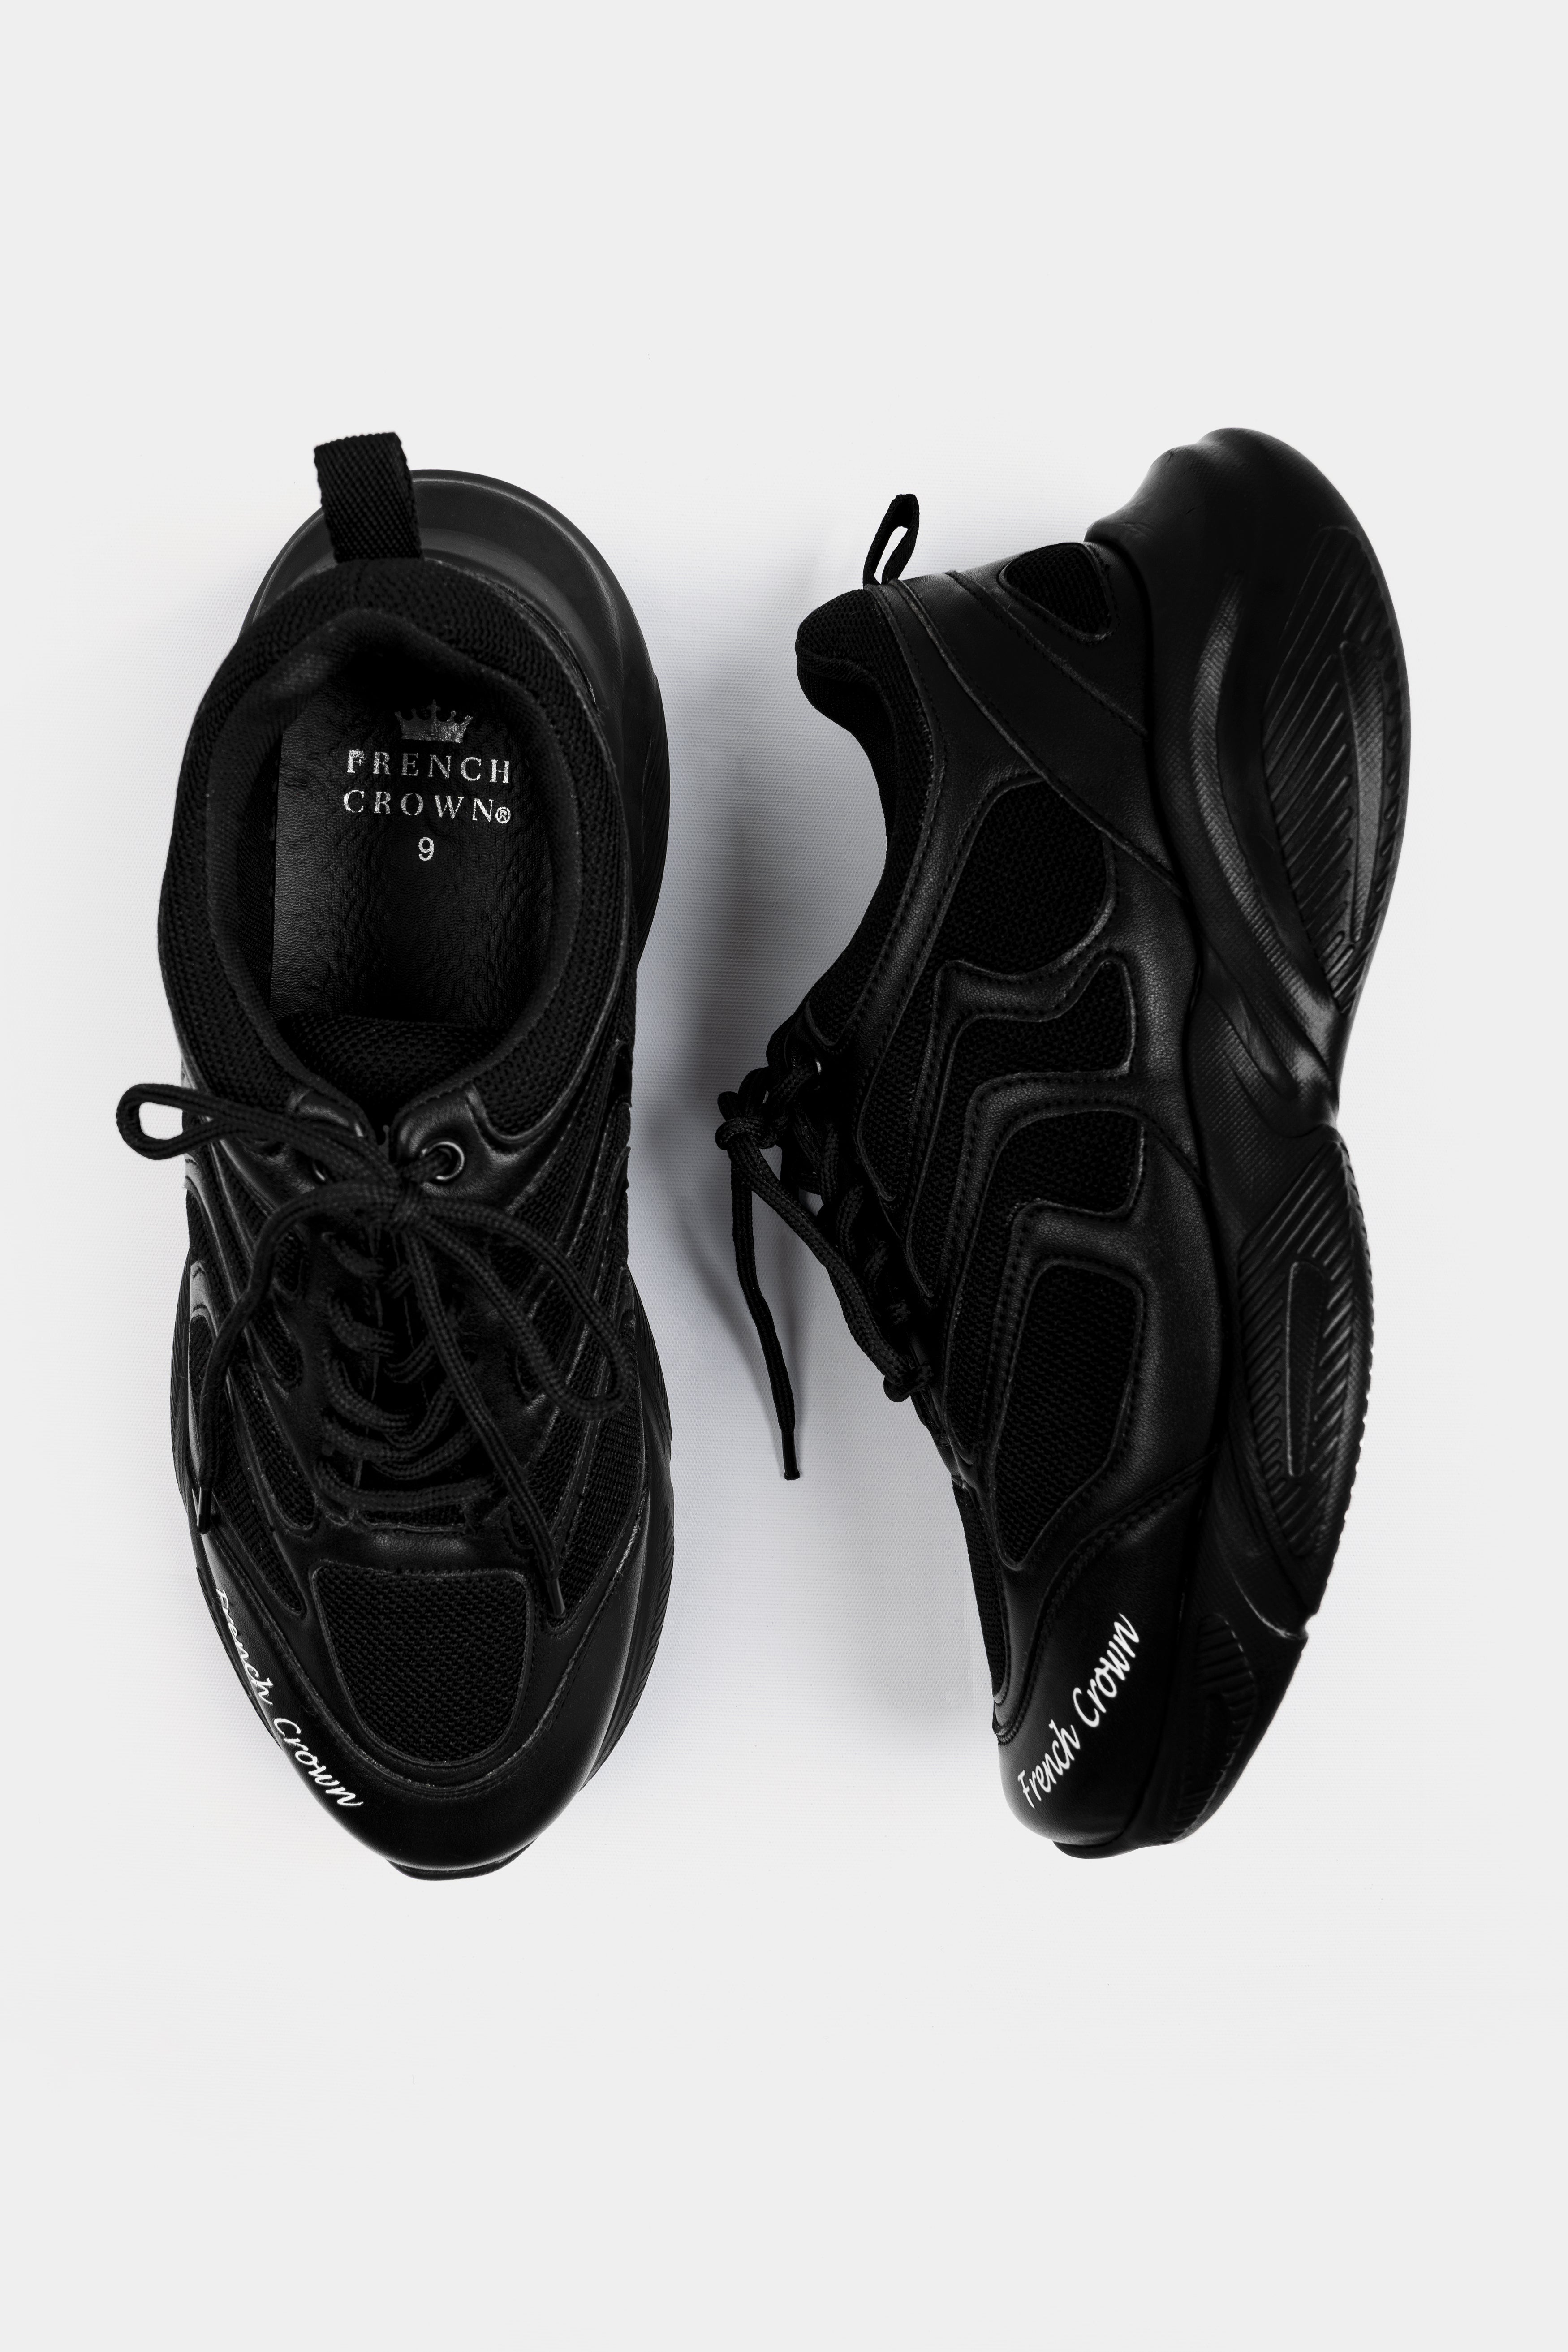 Jade Black Lace-up Running Shoes